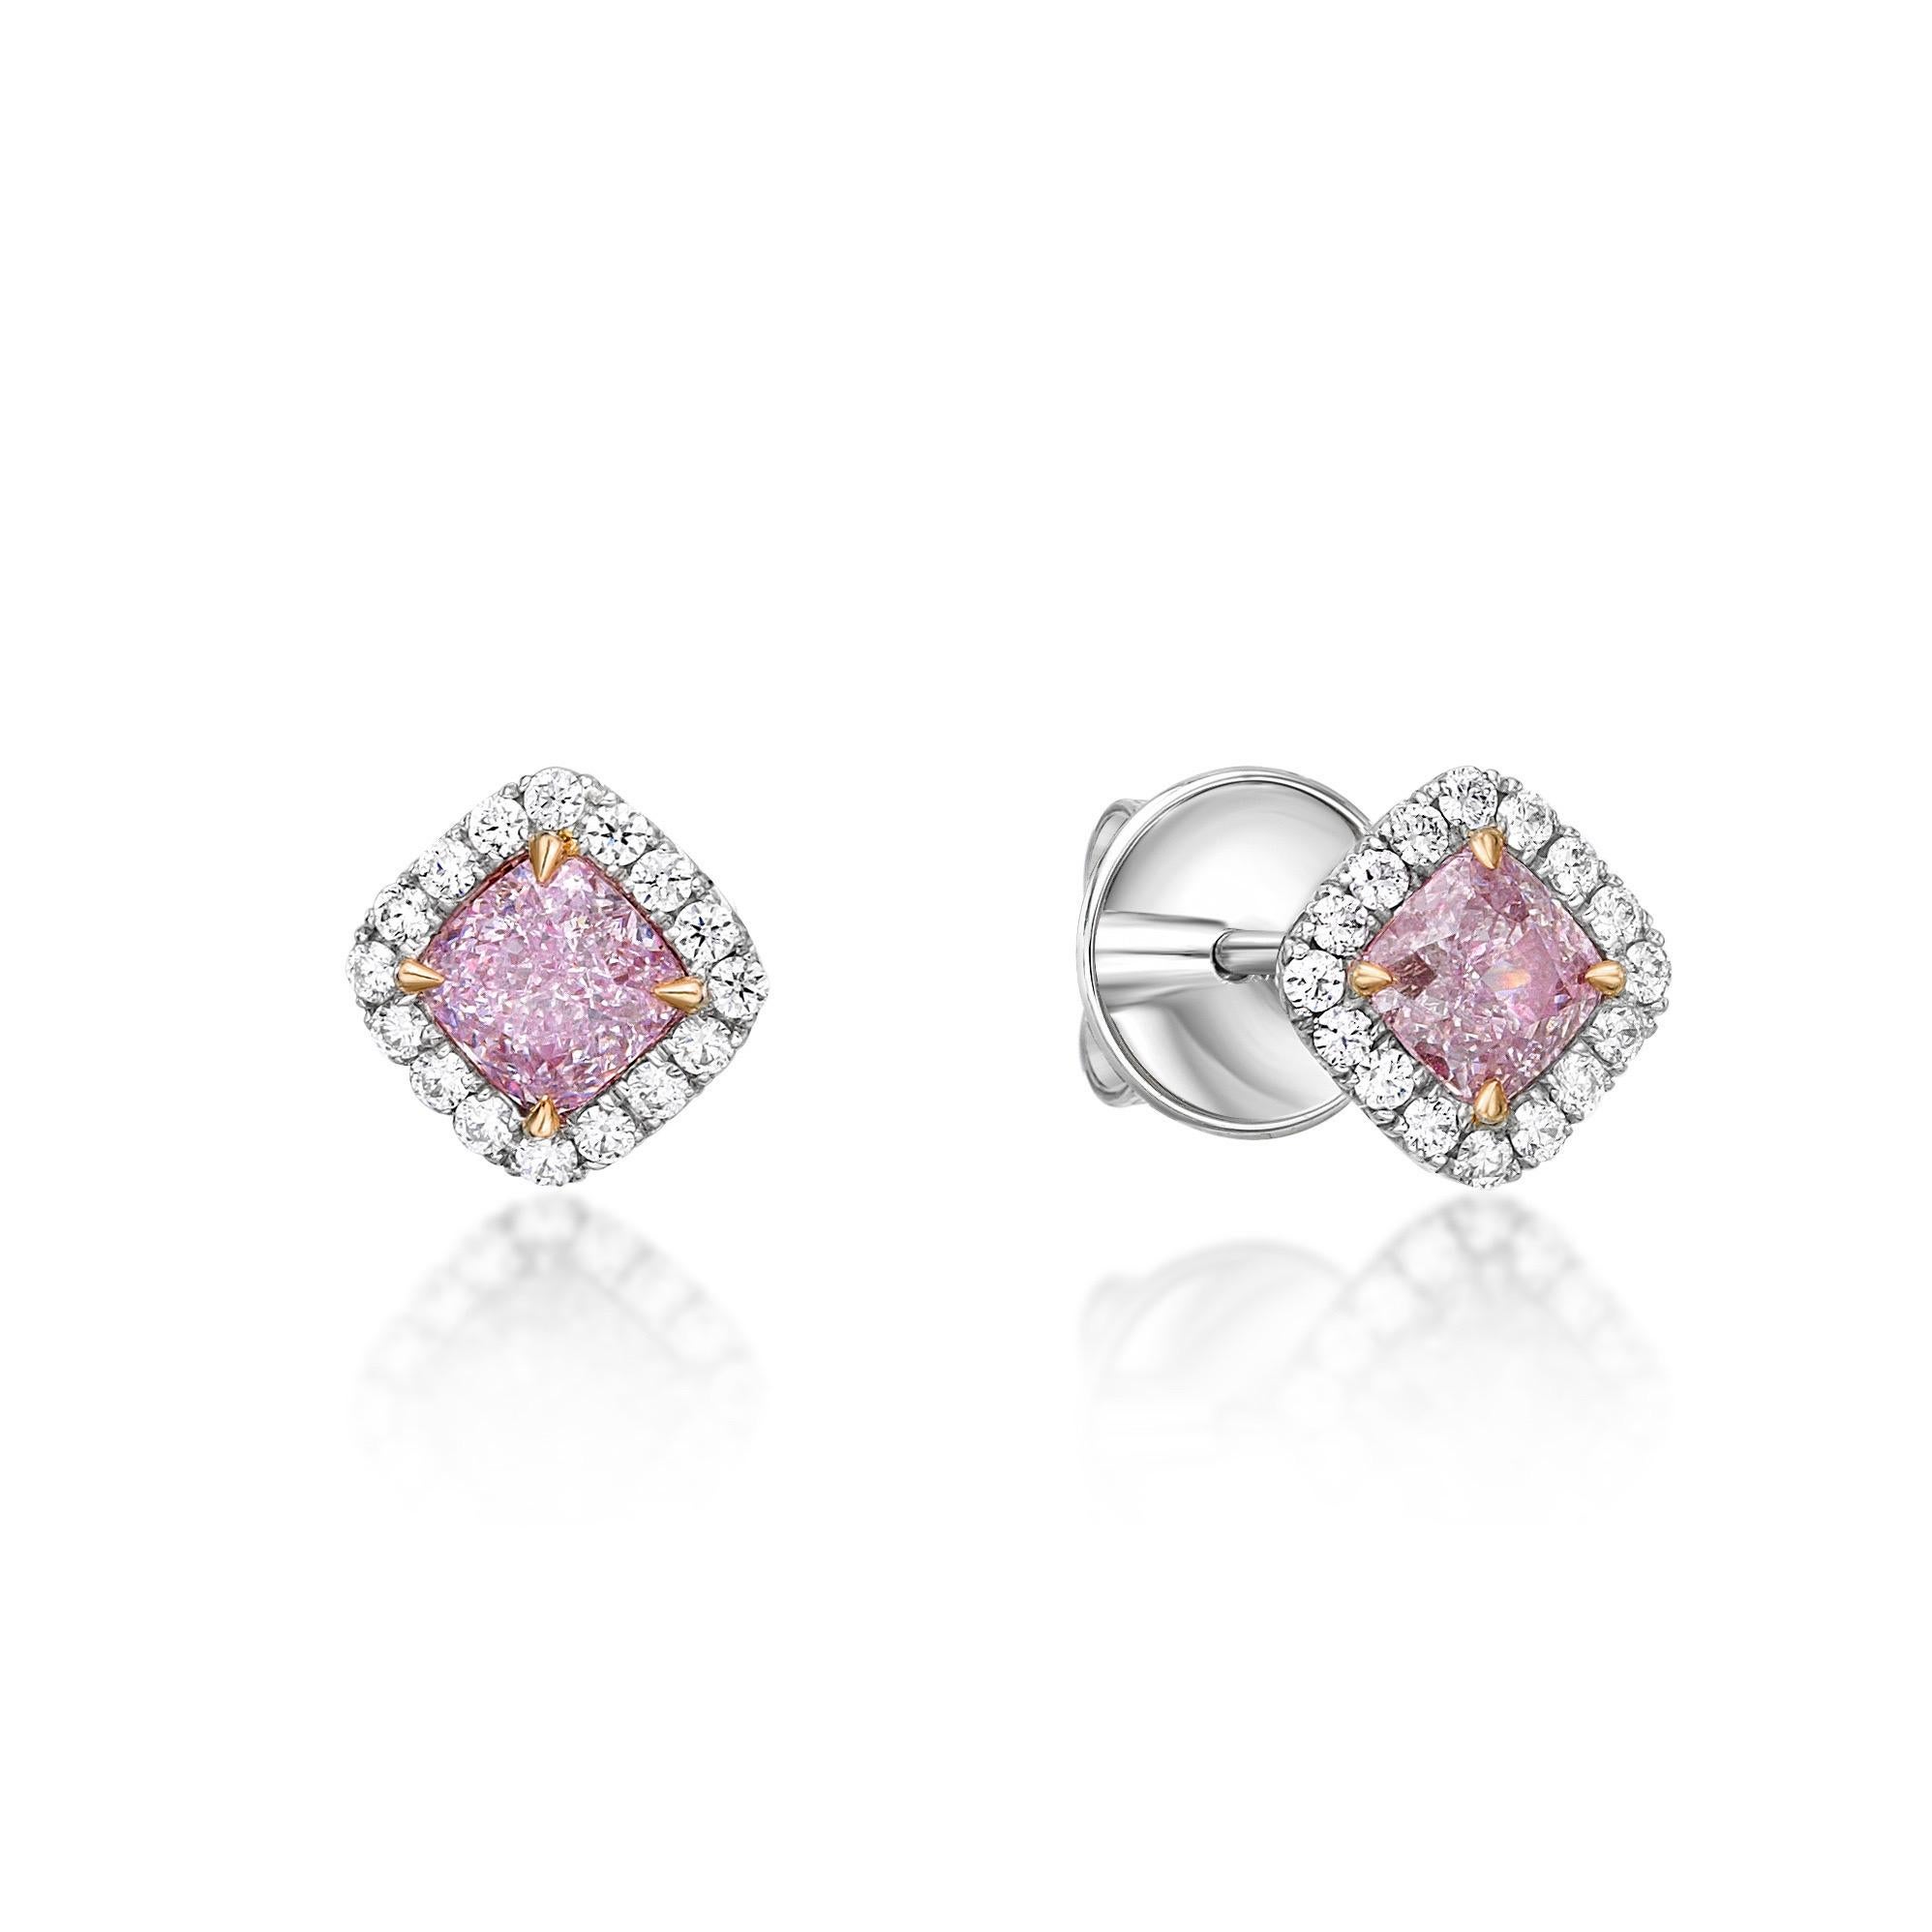 Featuring 2 cushion natural pinks diamonds totaling .78cts
32 colorless vs2 + round diamonds totaling .18cts
From The Museum Vault at Emilio Jewelry Located on New York's iconic Fifth Avenue,
Hand made in the Emilio Jewelry Atelier, whom specializes